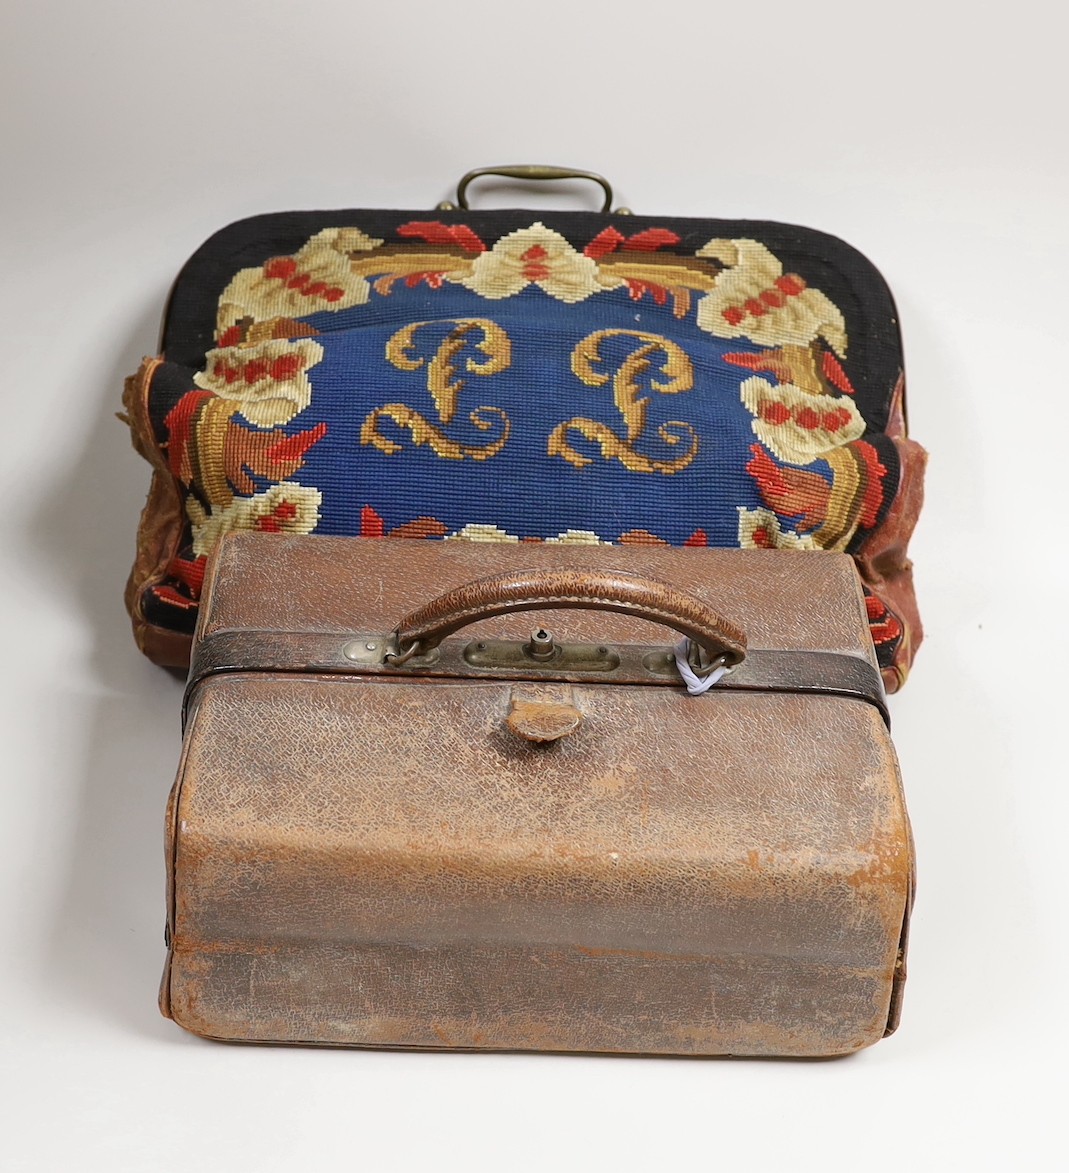 A 19th century needlework and leather bag and a leather Gladstone bag, needlework bag frame 40cms wide